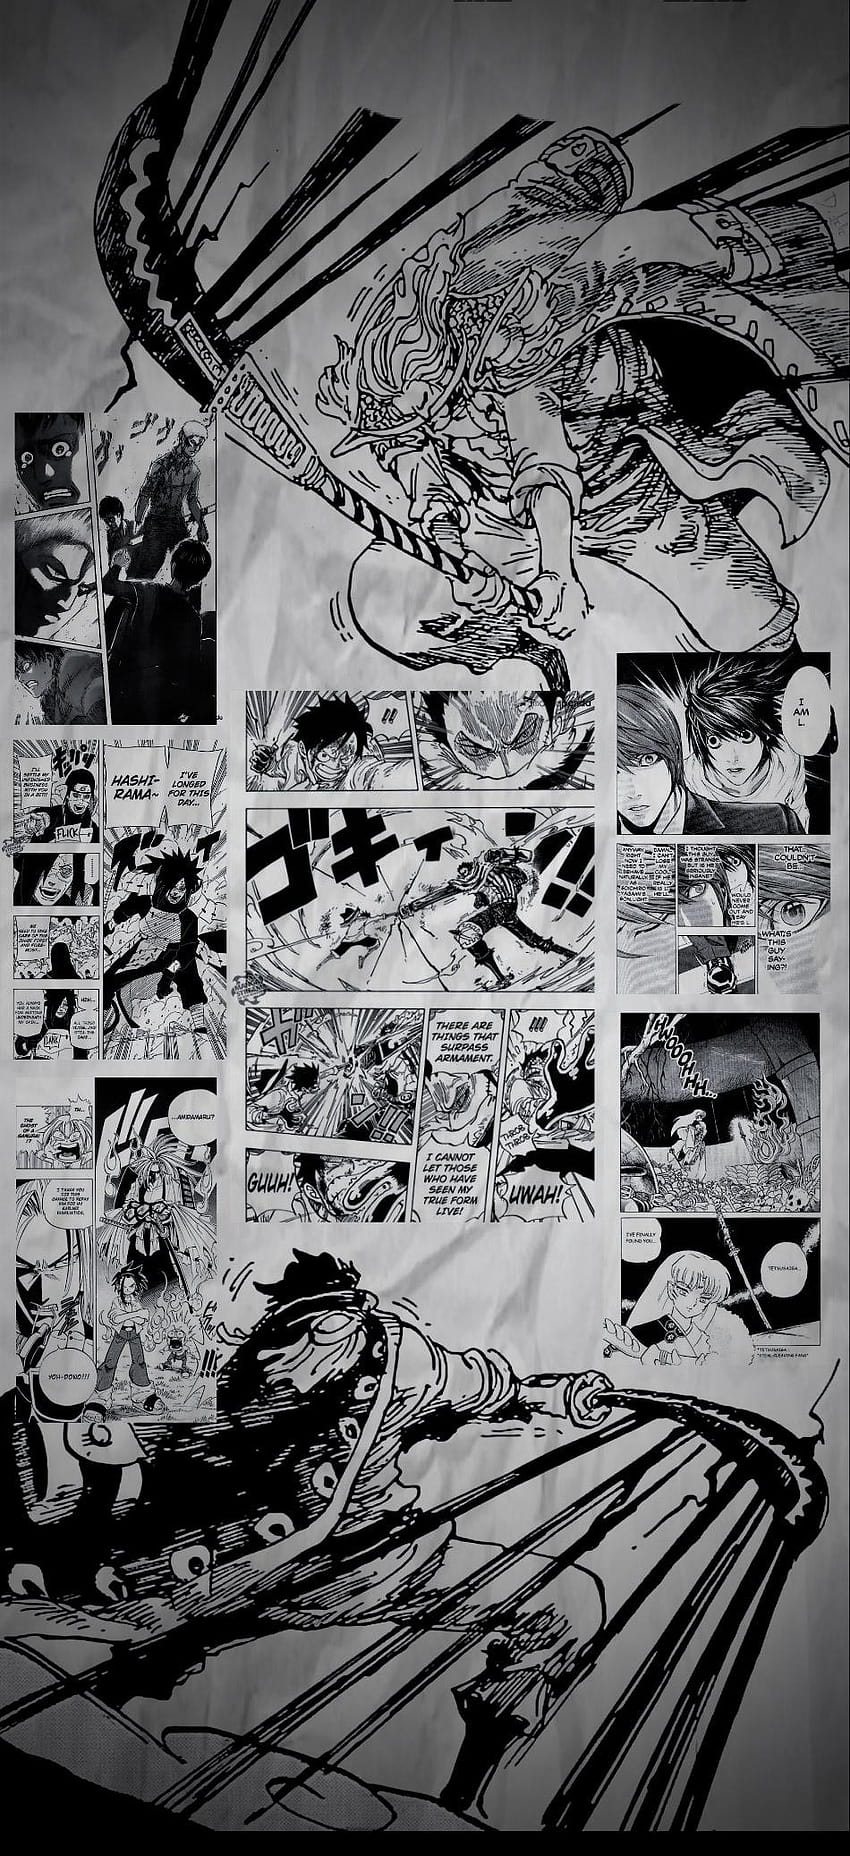 Wanted a manga panel phone so made one from my favorite scenes with one piece at the base of it. Enjoy! : r/OnePiece, one piece manga phone HD phone wallpaper